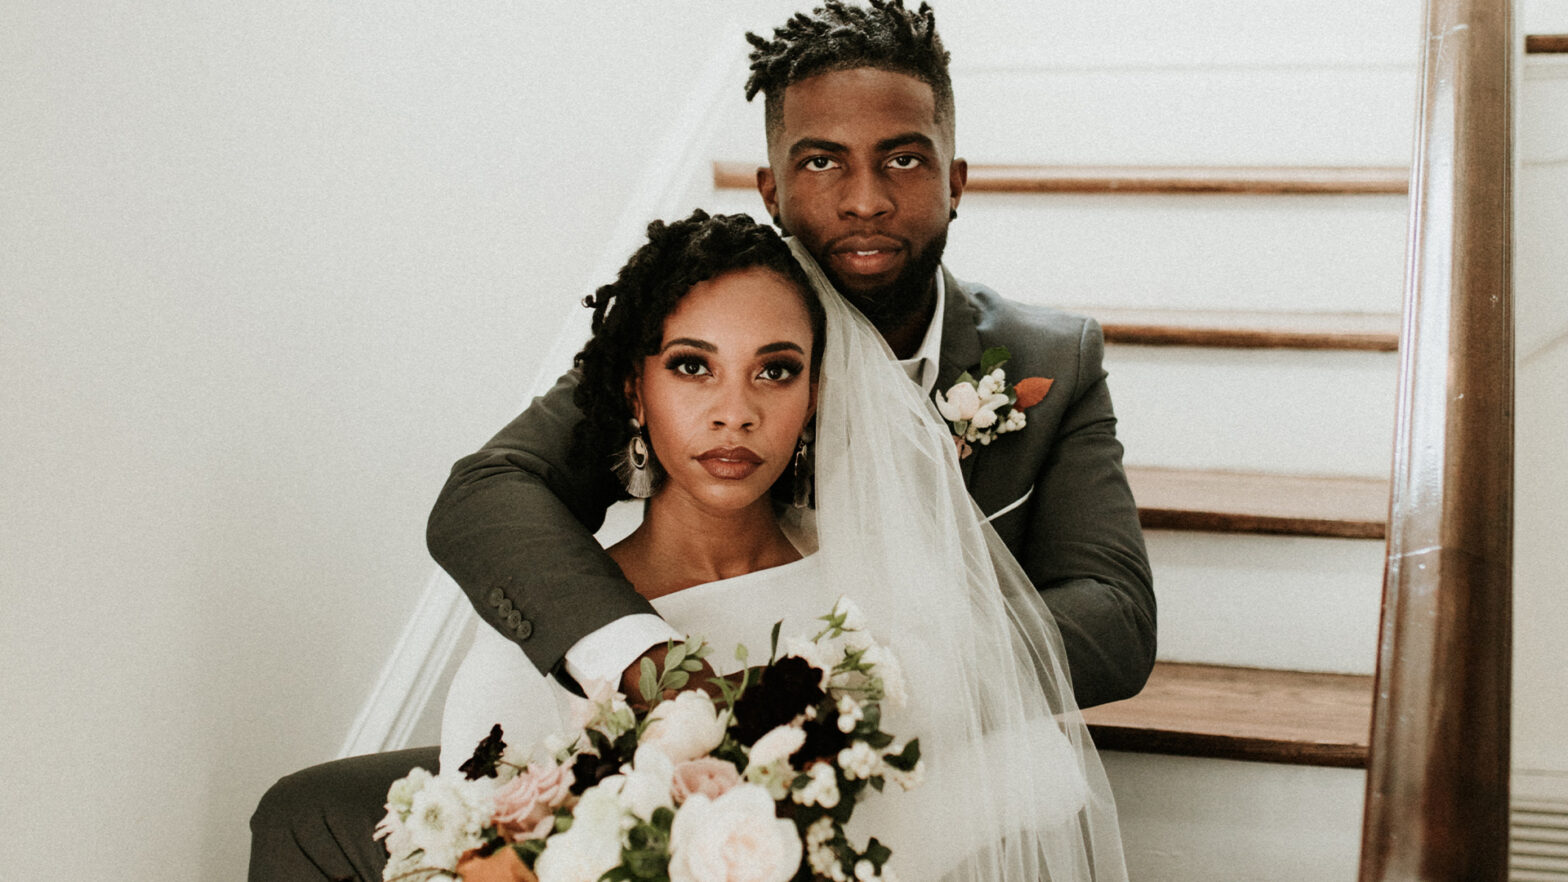 are taurus and capricorn compatible? pictured: married black couple on steps